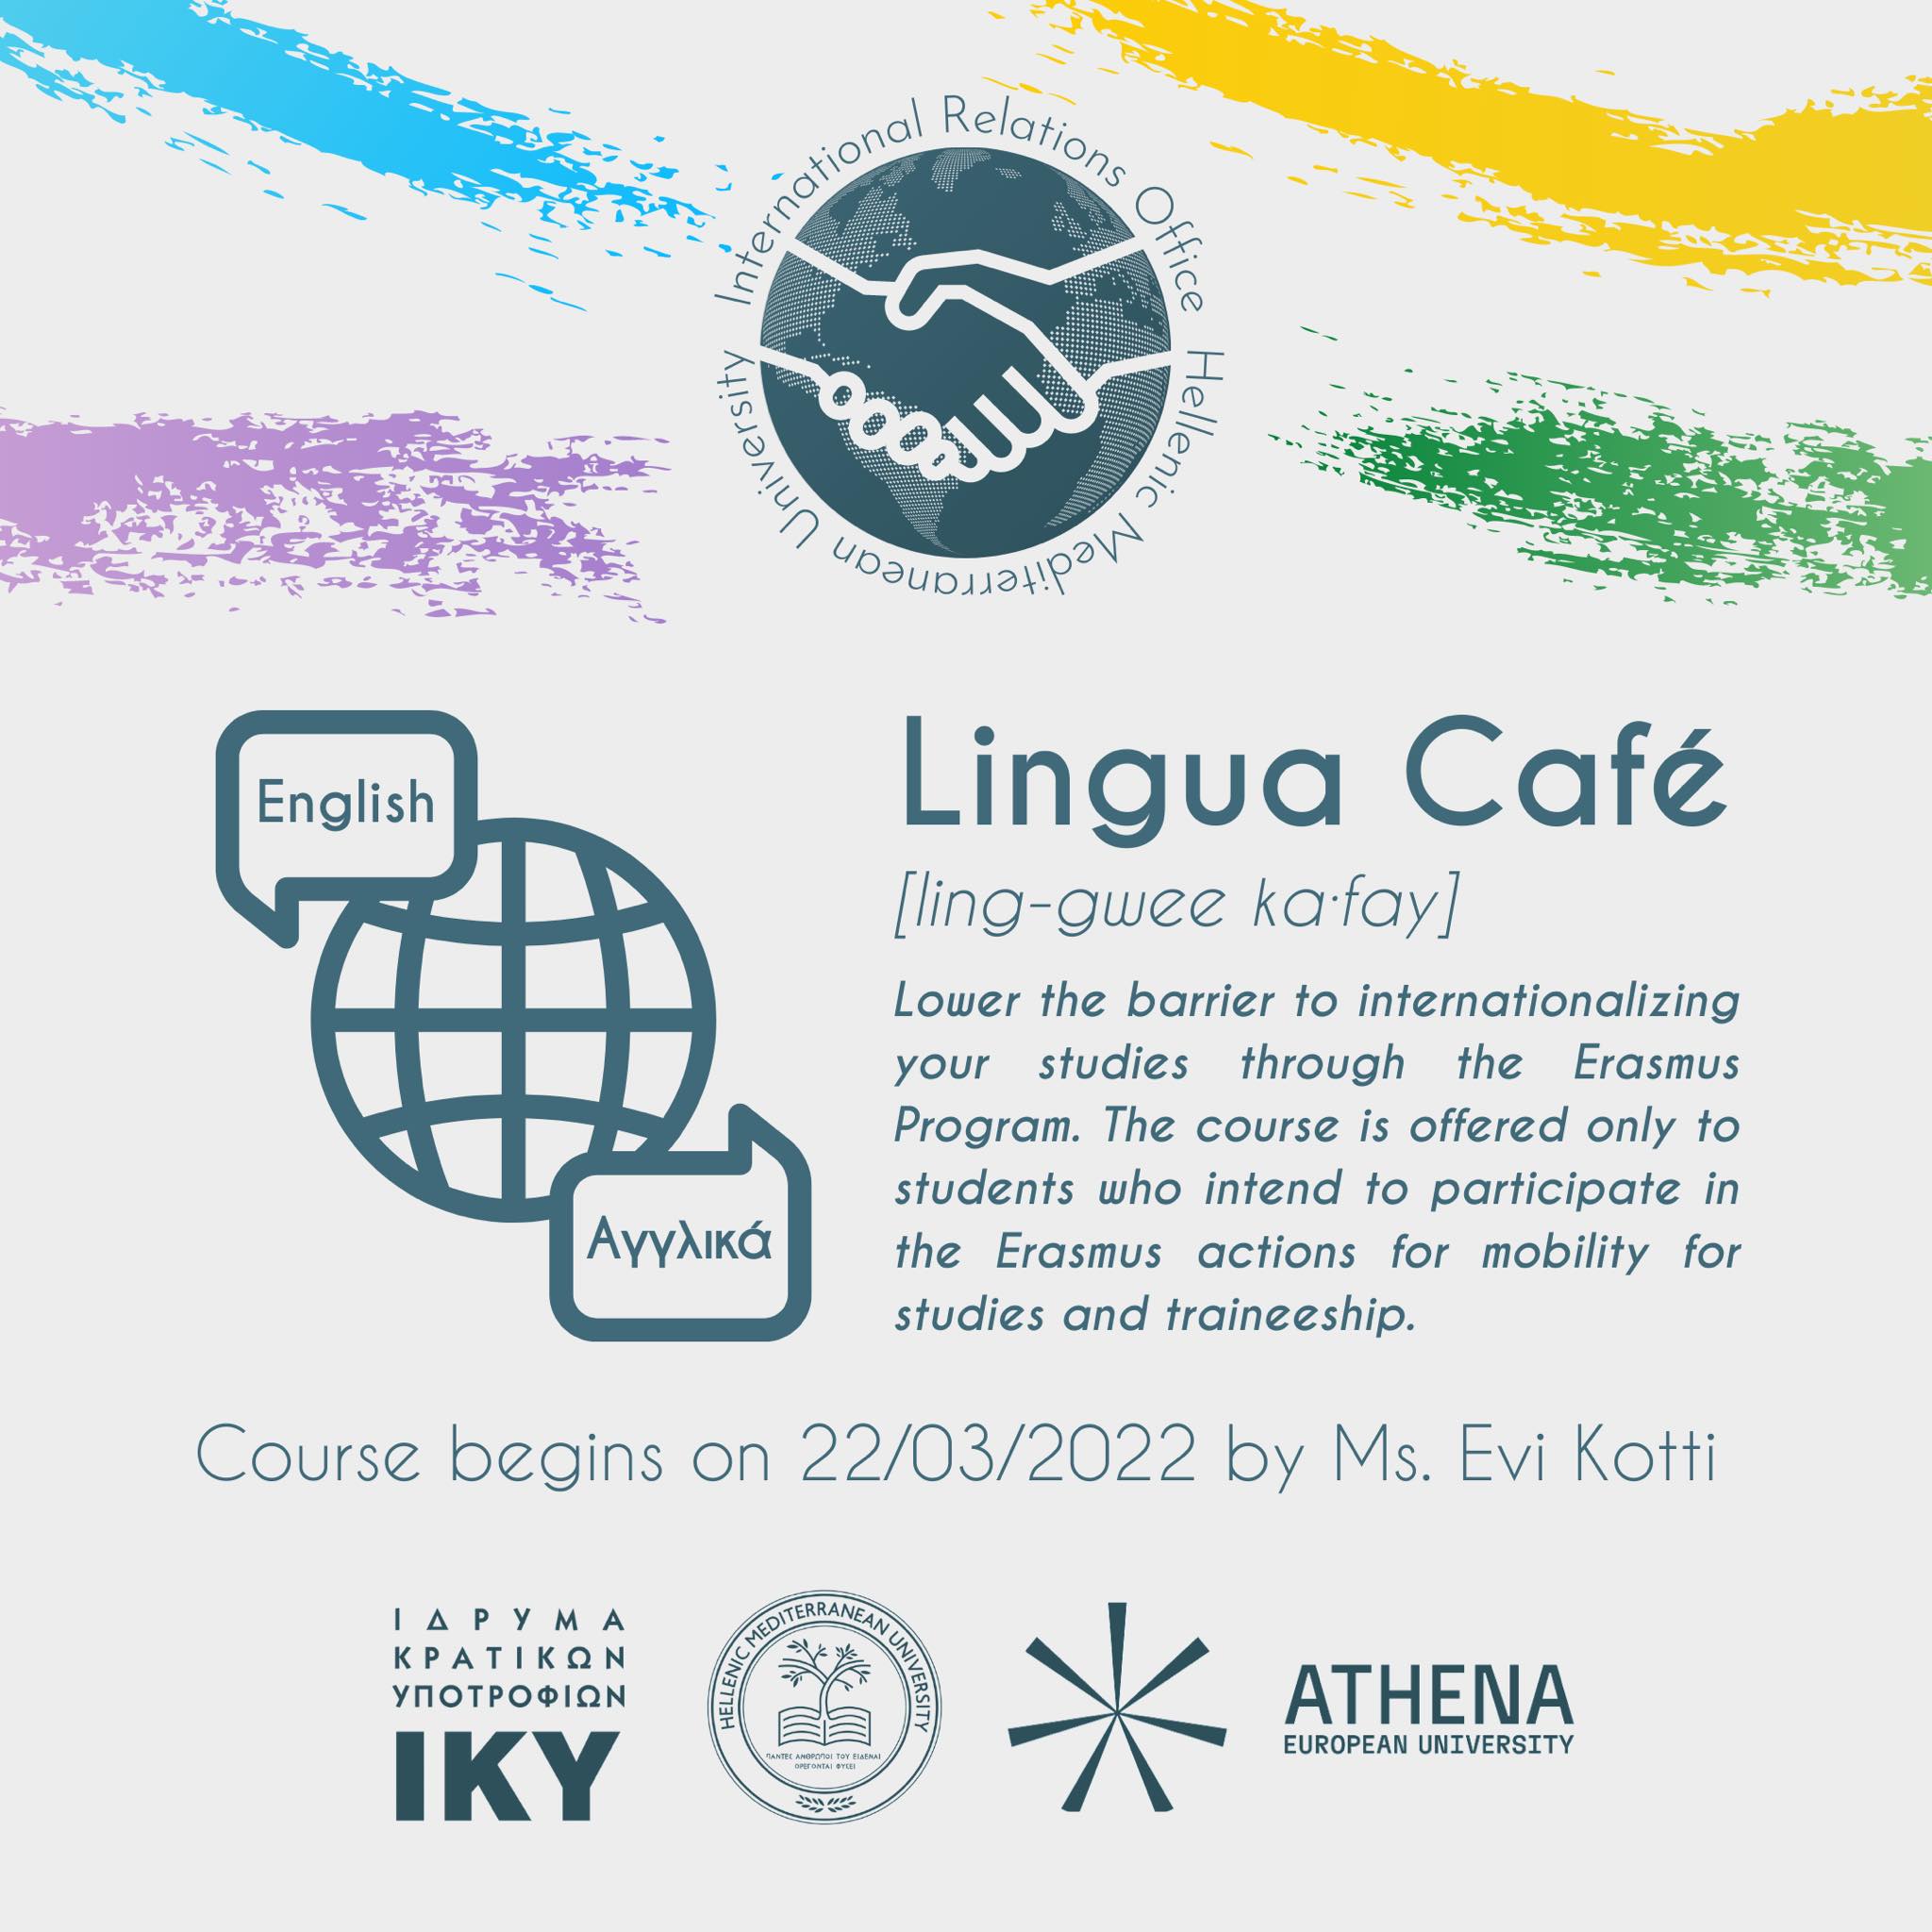 Sci-Cafe Lingua initiative, launches free lectures in English language